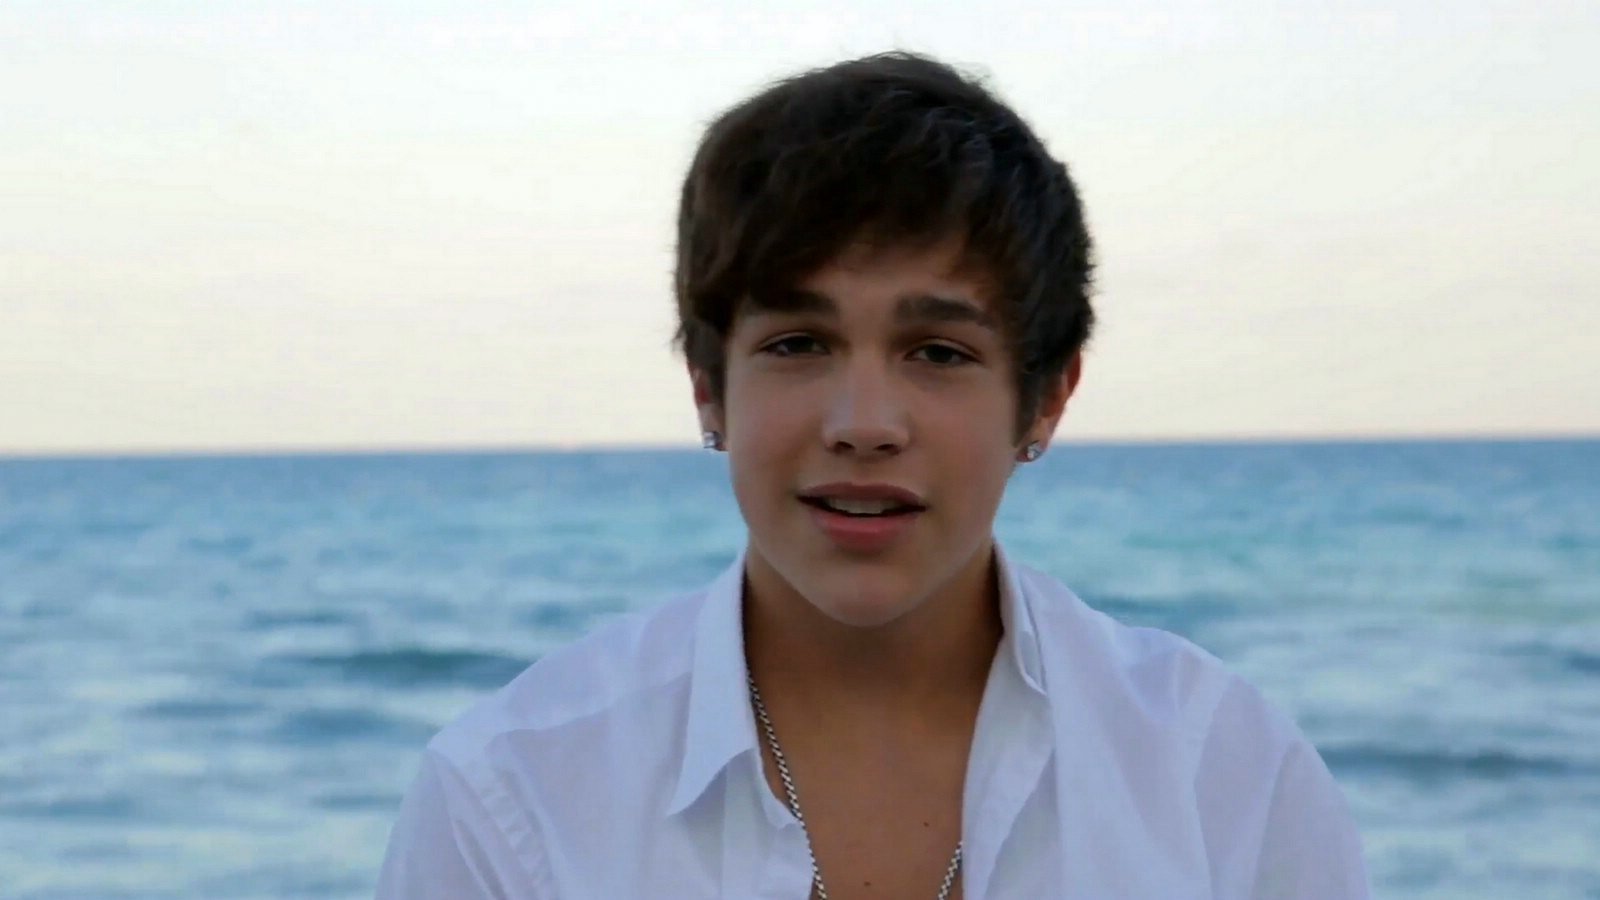 Austin Mahone Heart In My Hand Live On The Beach